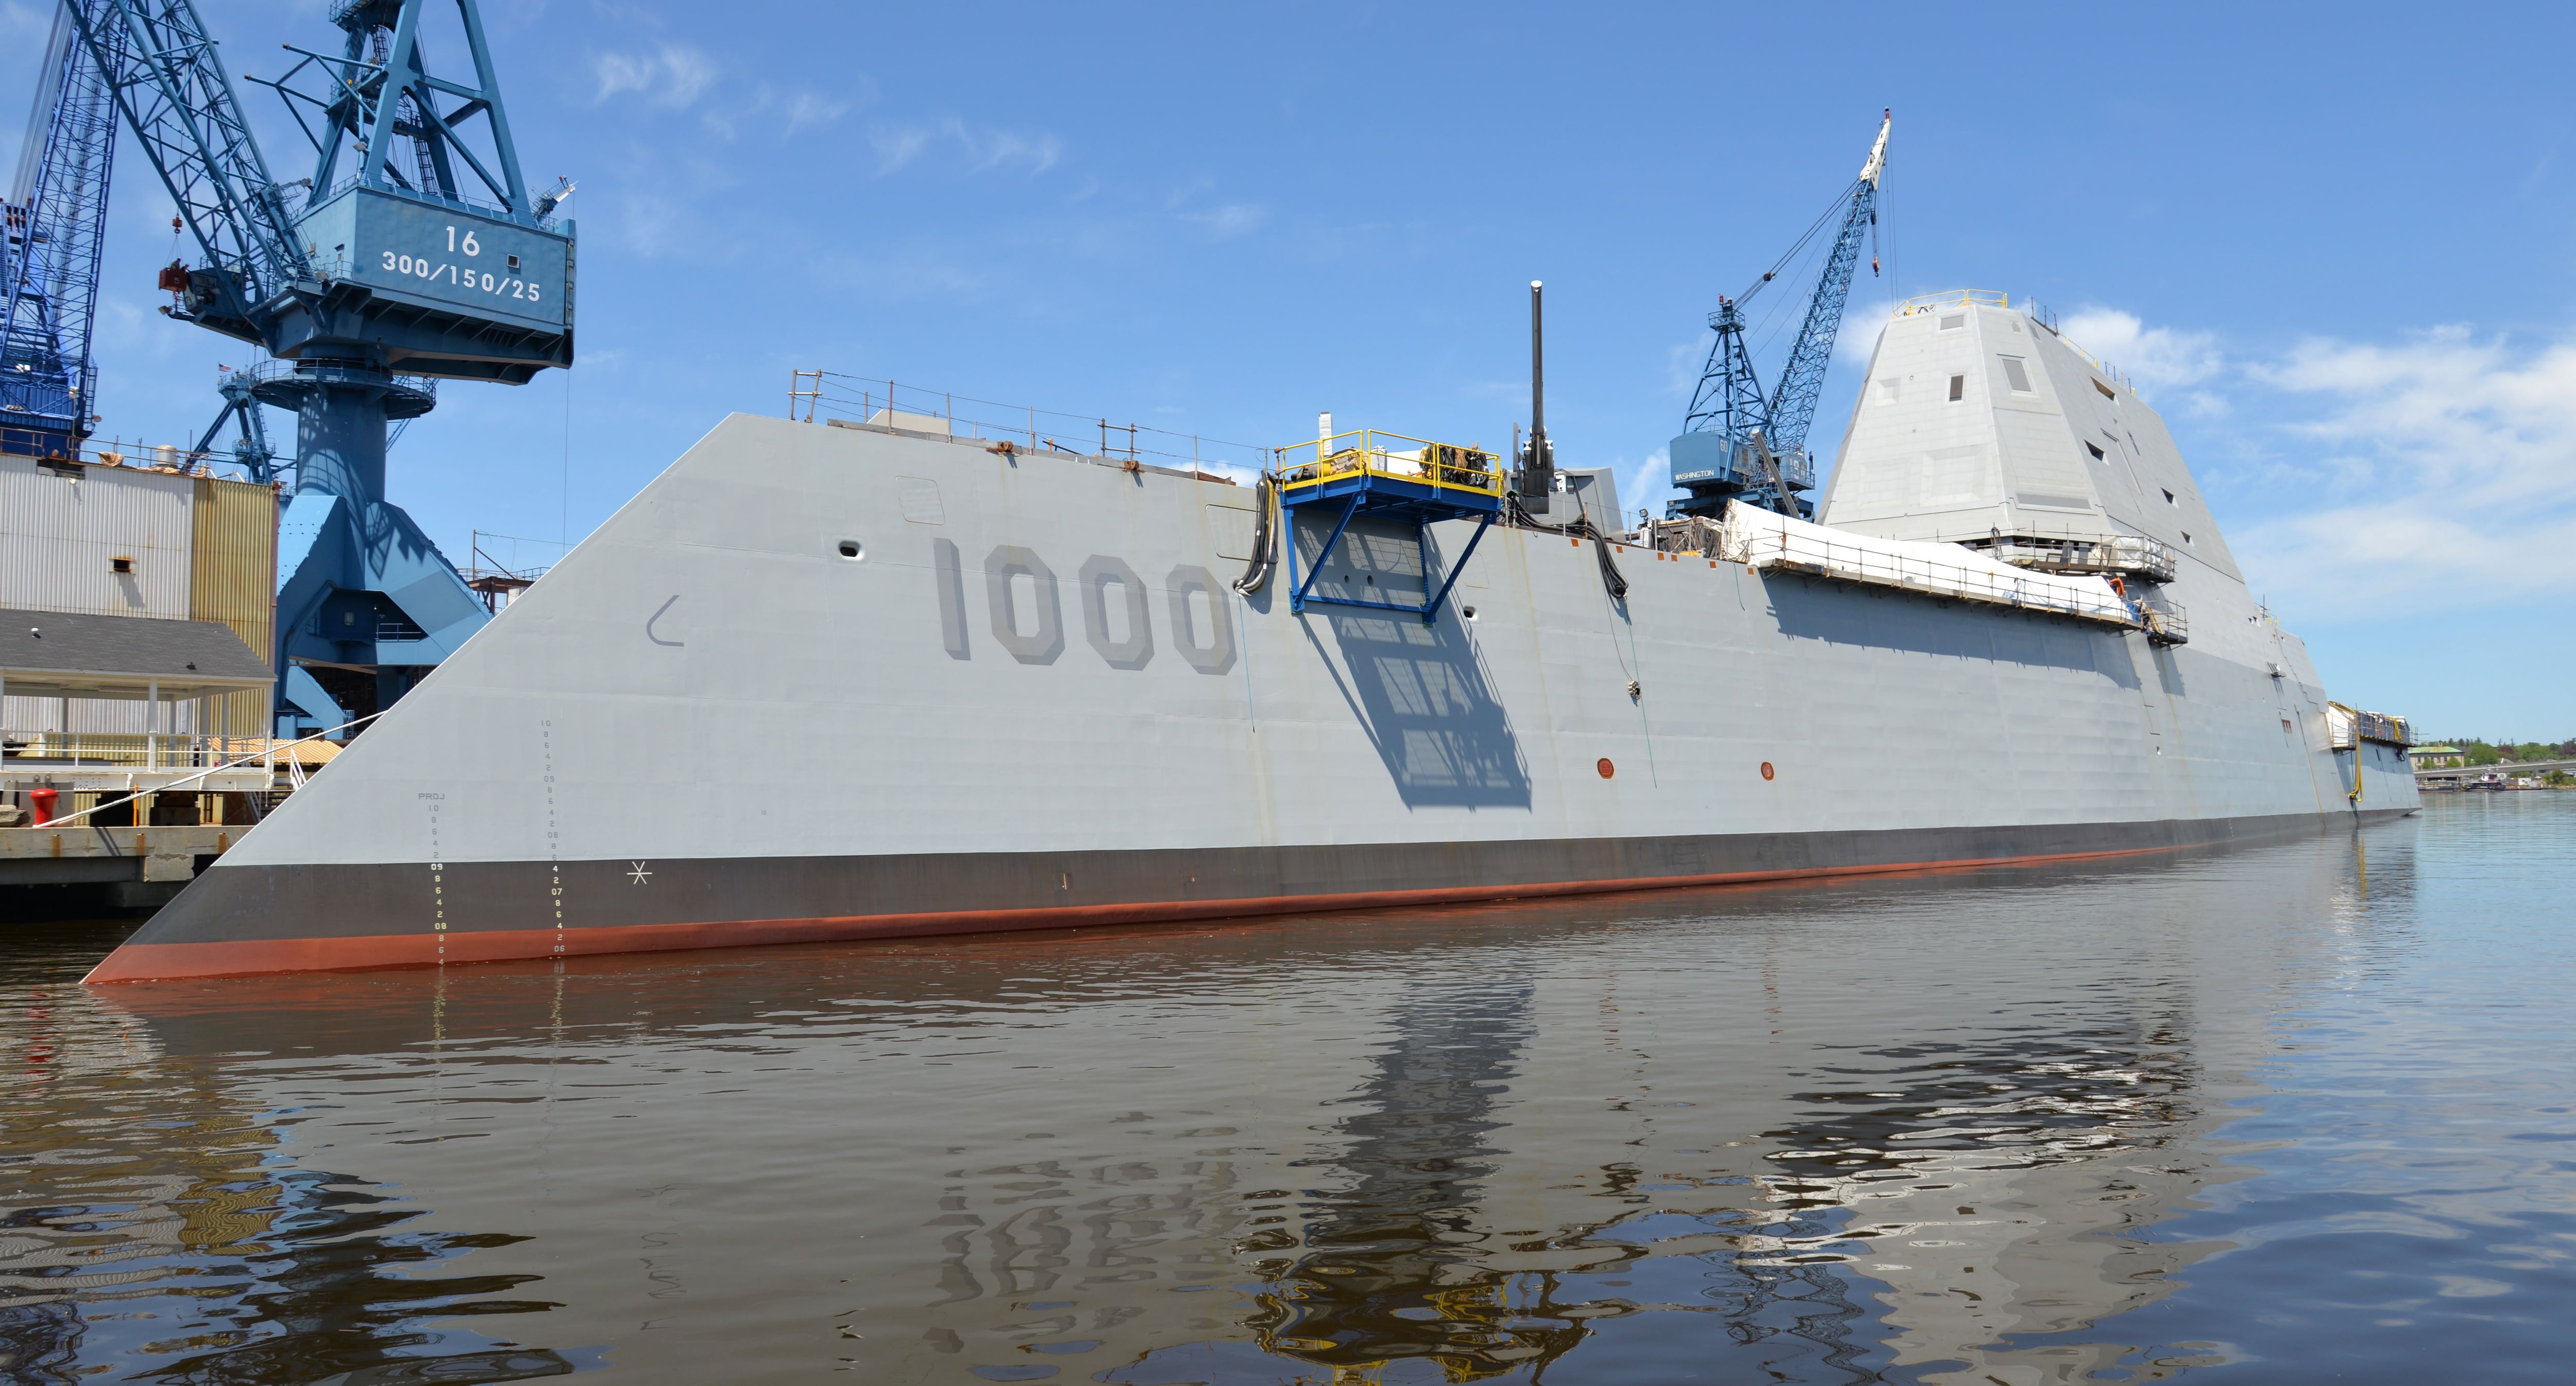 Instability Questions About Zumwalt Destroyer Are Nothing New